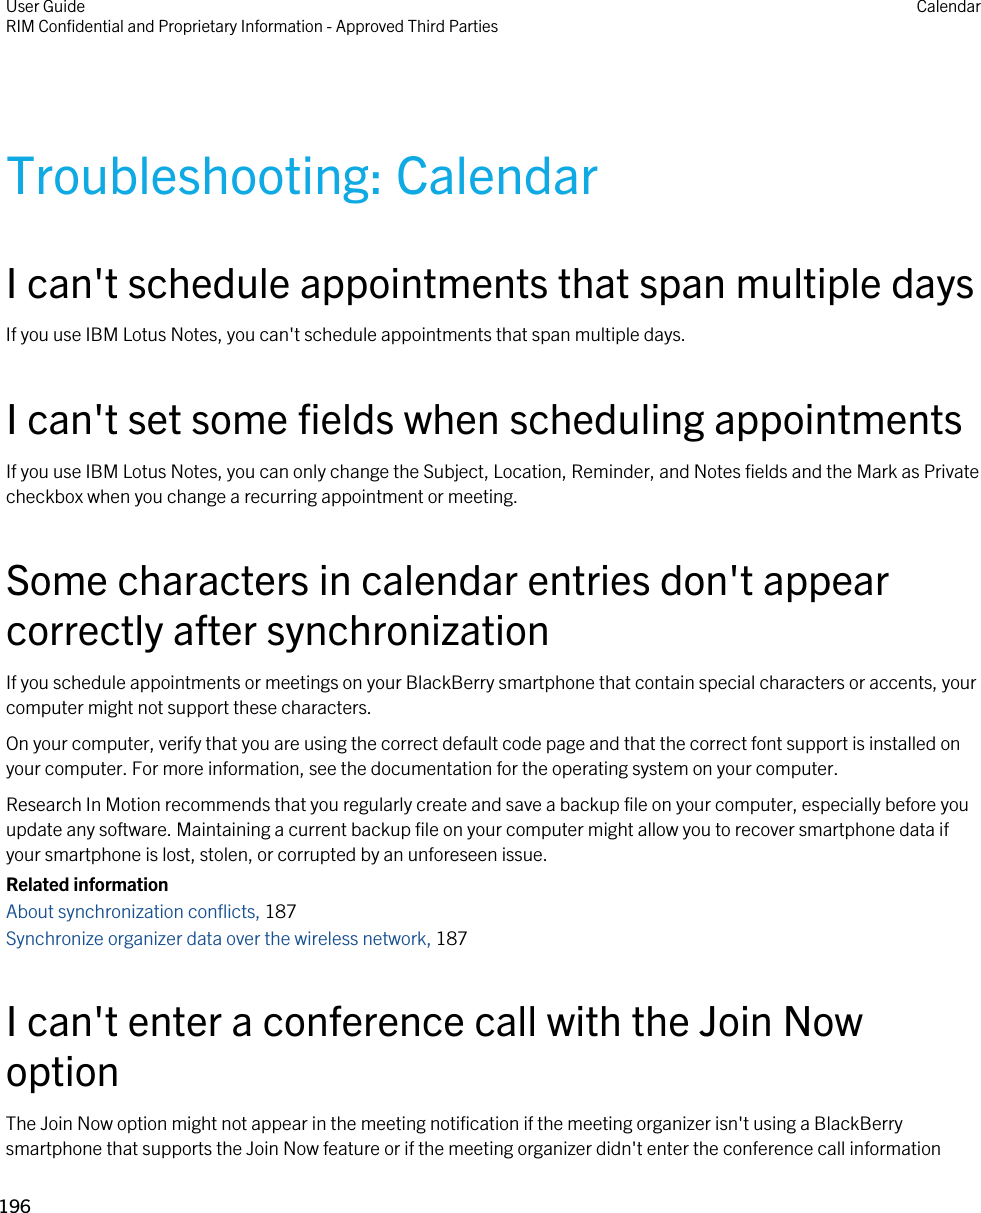 Troubleshooting: CalendarI can&apos;t schedule appointments that span multiple daysIf you use IBM Lotus Notes, you can&apos;t schedule appointments that span multiple days.I can&apos;t set some fields when scheduling appointmentsIf you use IBM Lotus Notes, you can only change the Subject, Location, Reminder, and Notes fields and the Mark as Private checkbox when you change a recurring appointment or meeting.Some characters in calendar entries don&apos;t appear correctly after synchronizationIf you schedule appointments or meetings on your BlackBerry smartphone that contain special characters or accents, your computer might not support these characters.On your computer, verify that you are using the correct default code page and that the correct font support is installed on your computer. For more information, see the documentation for the operating system on your computer.Research In Motion recommends that you regularly create and save a backup file on your computer, especially before you update any software. Maintaining a current backup file on your computer might allow you to recover smartphone data if your smartphone is lost, stolen, or corrupted by an unforeseen issue.Related informationAbout synchronization conflicts, 187 Synchronize organizer data over the wireless network, 187 I can&apos;t enter a conference call with the Join Now optionThe Join Now option might not appear in the meeting notification if the meeting organizer isn&apos;t using a BlackBerry smartphone that supports the Join Now feature or if the meeting organizer didn&apos;t enter the conference call information User GuideRIM Confidential and Proprietary Information - Approved Third Parties Calendar196 